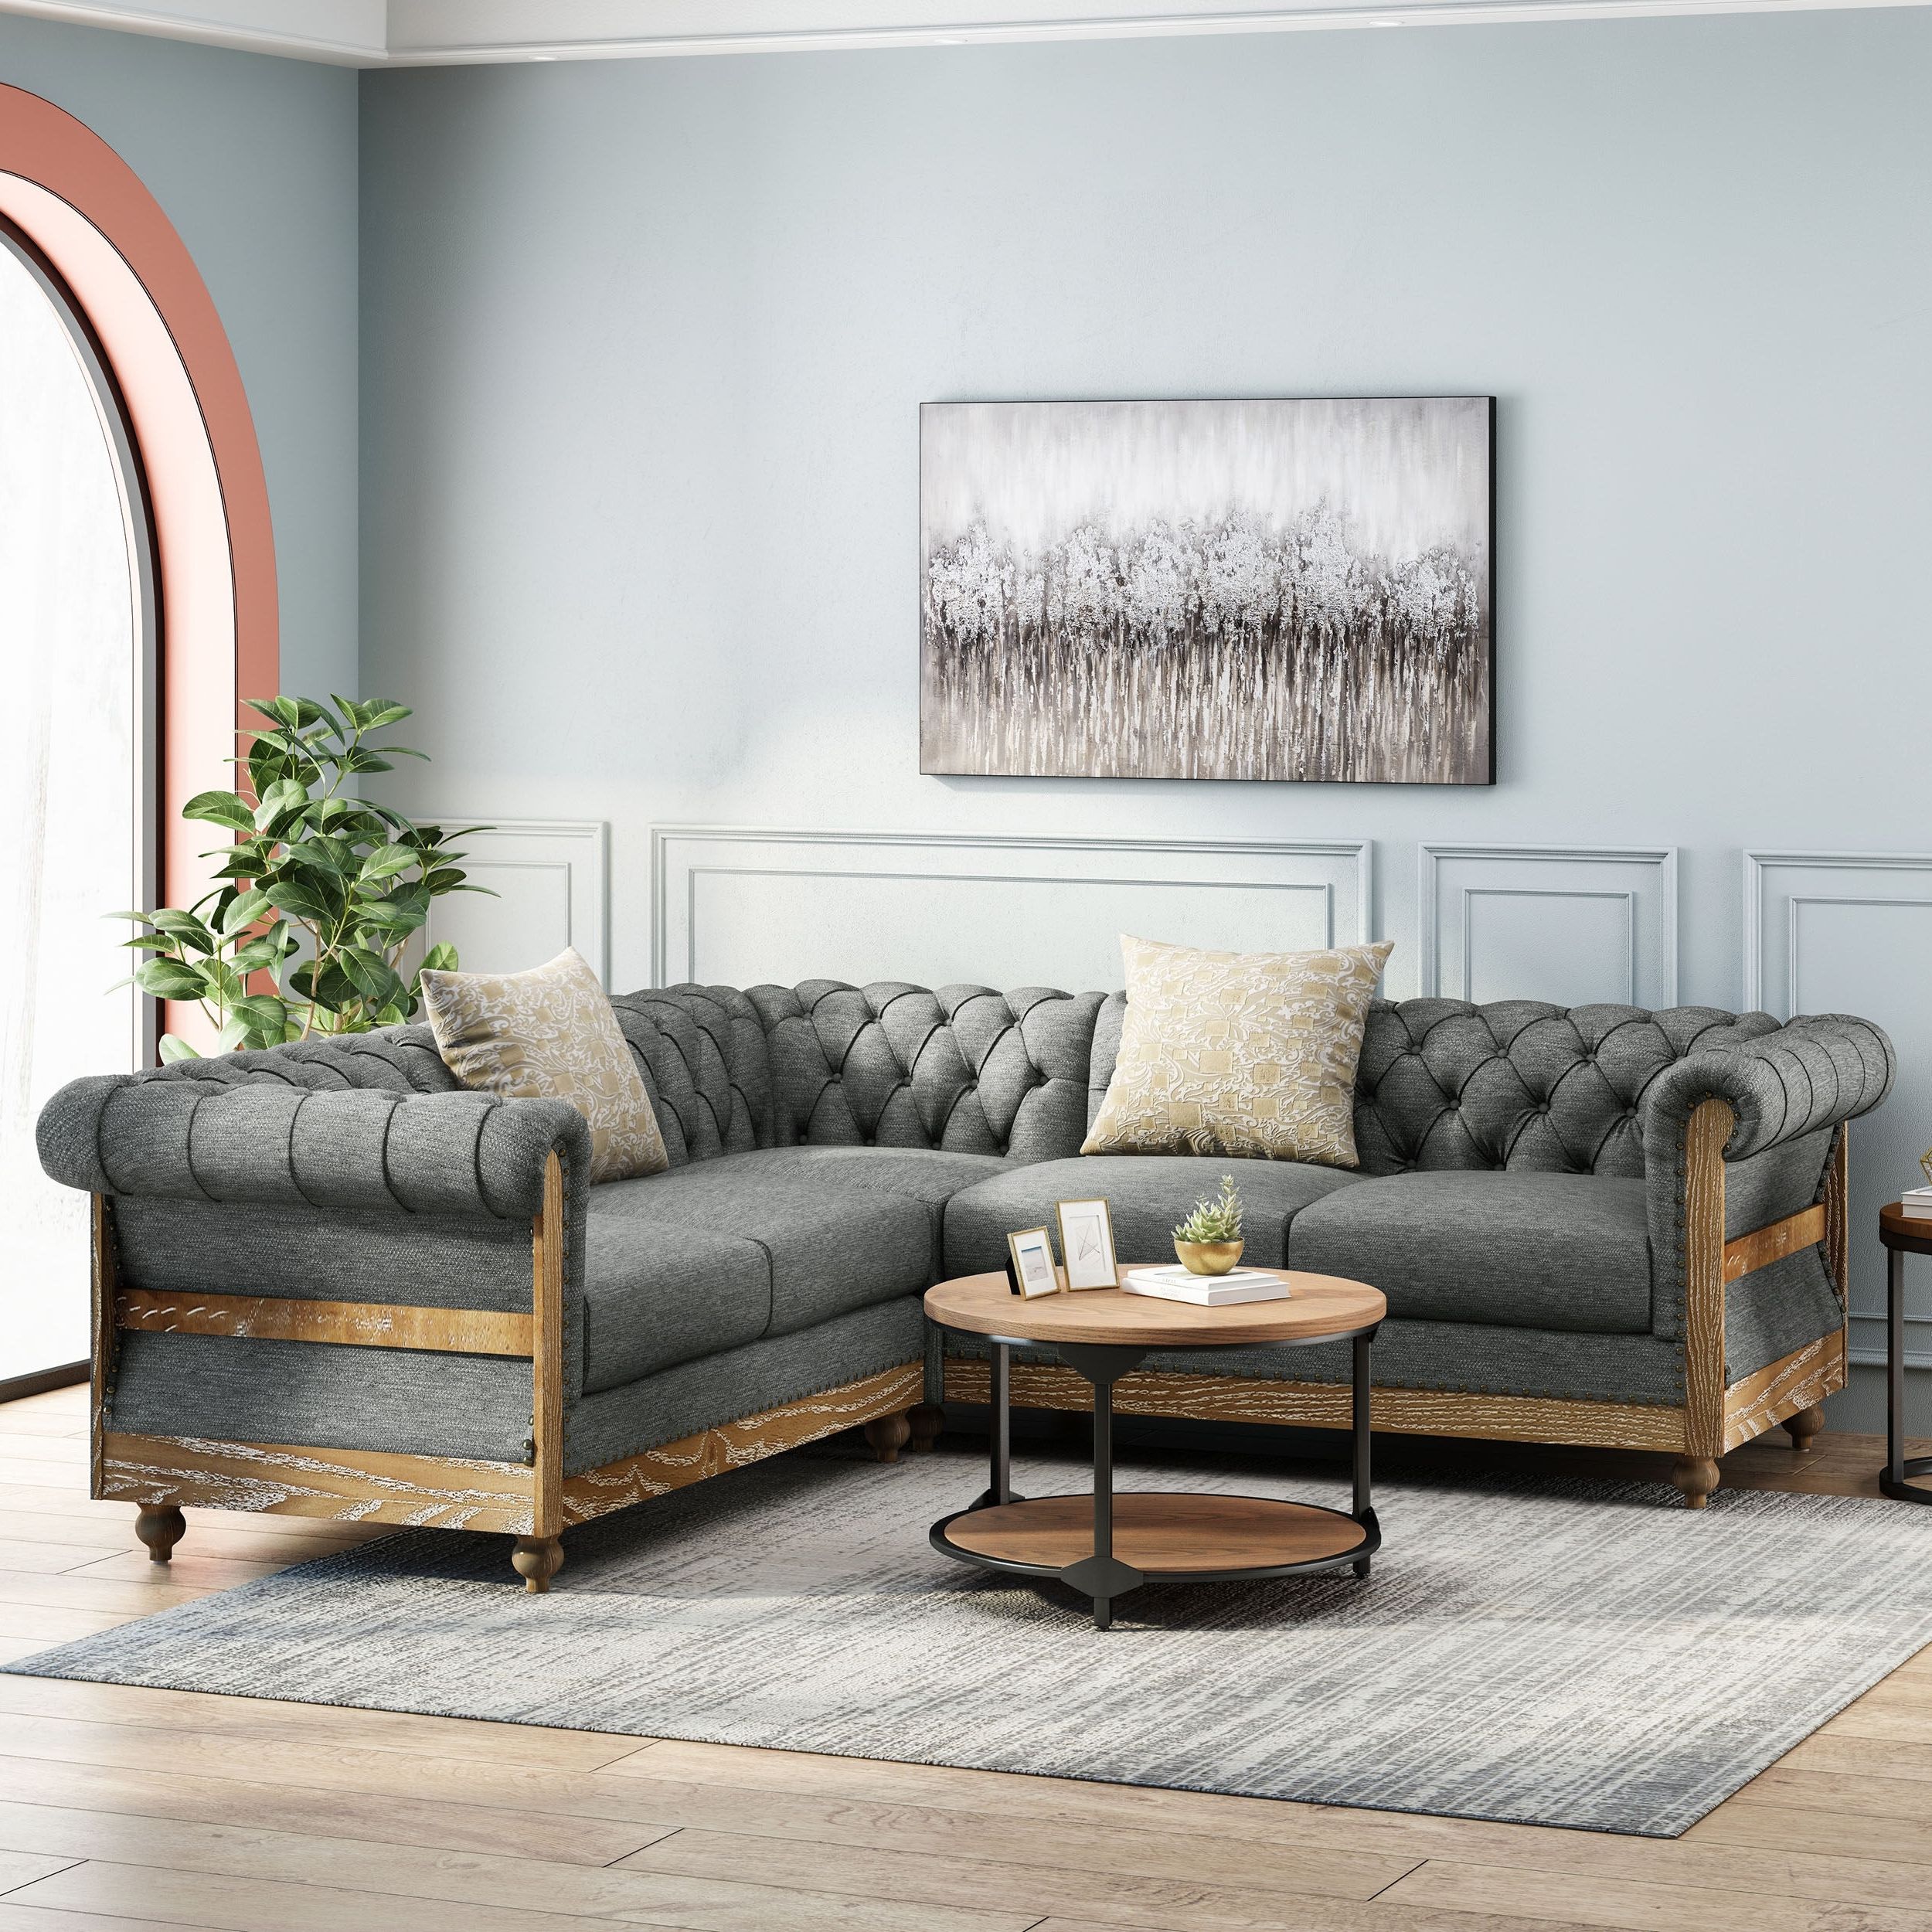 Voll Tufted Sectional Sofa With Nailhead Trimchristopher Knight Home –  On Sale – – 34155767 With Sofas With Nailhead Trim (Gallery 11 of 20)